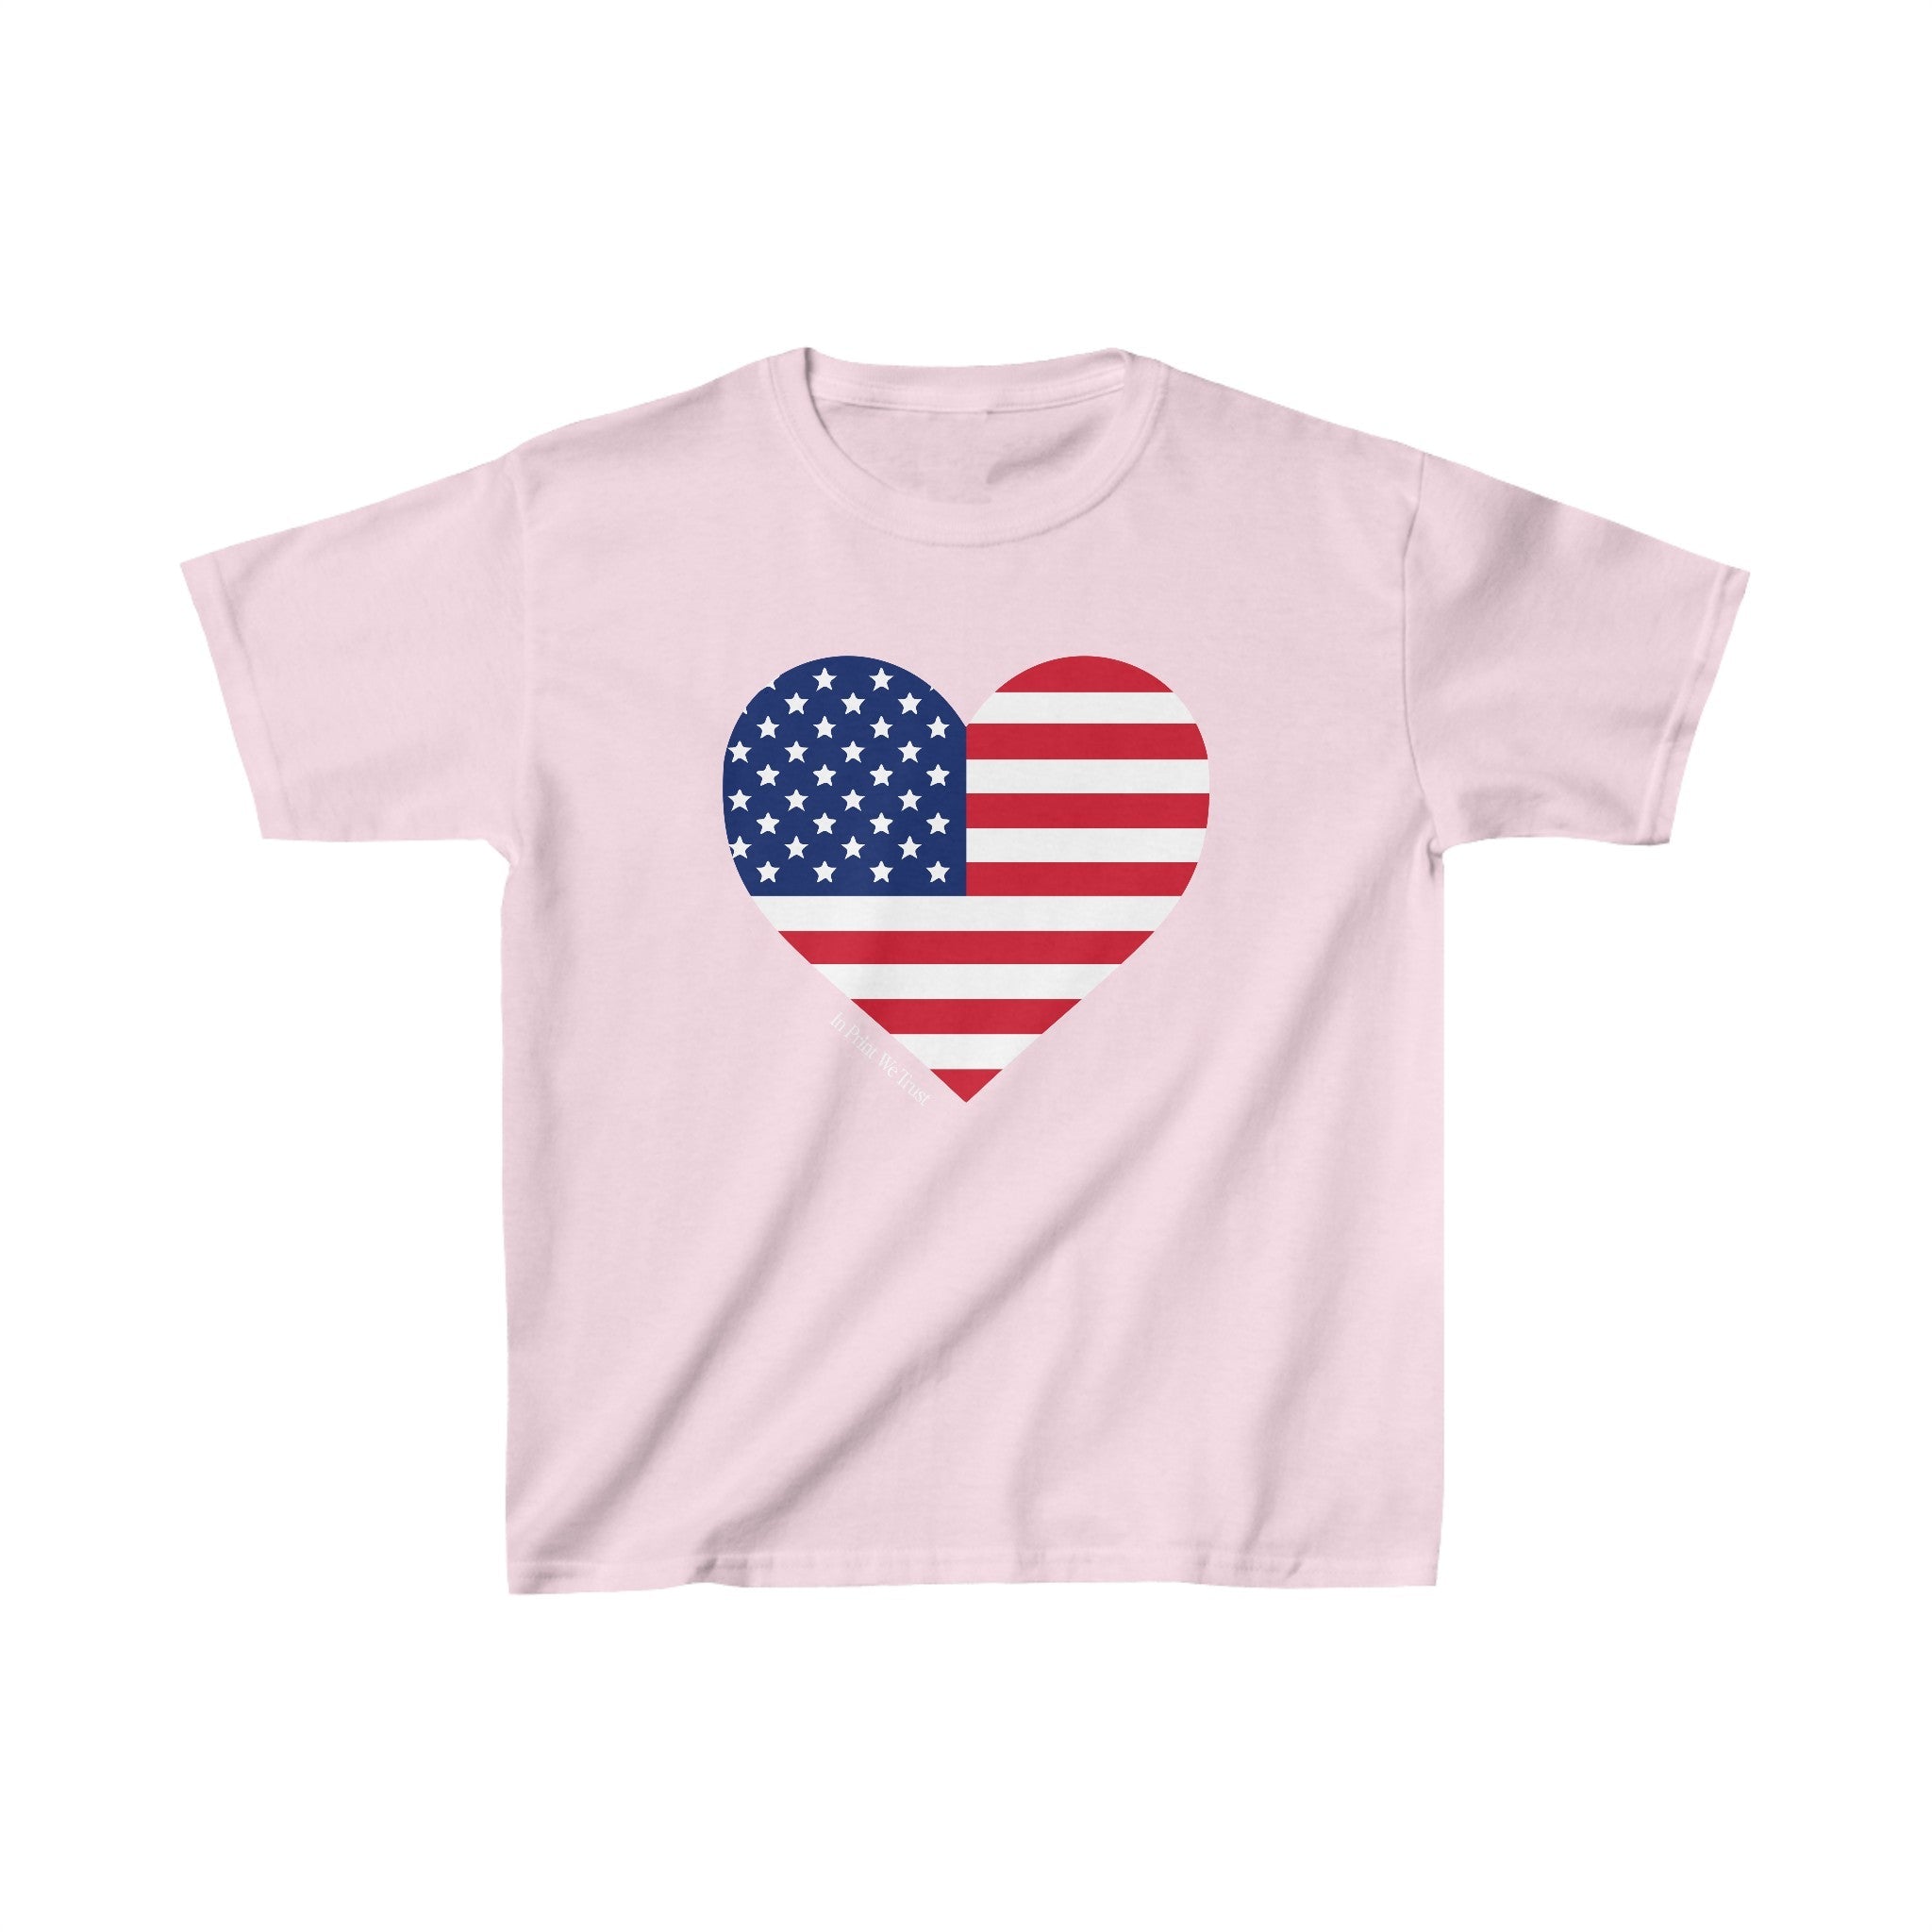 'United States' baby tee - In Print We Trust